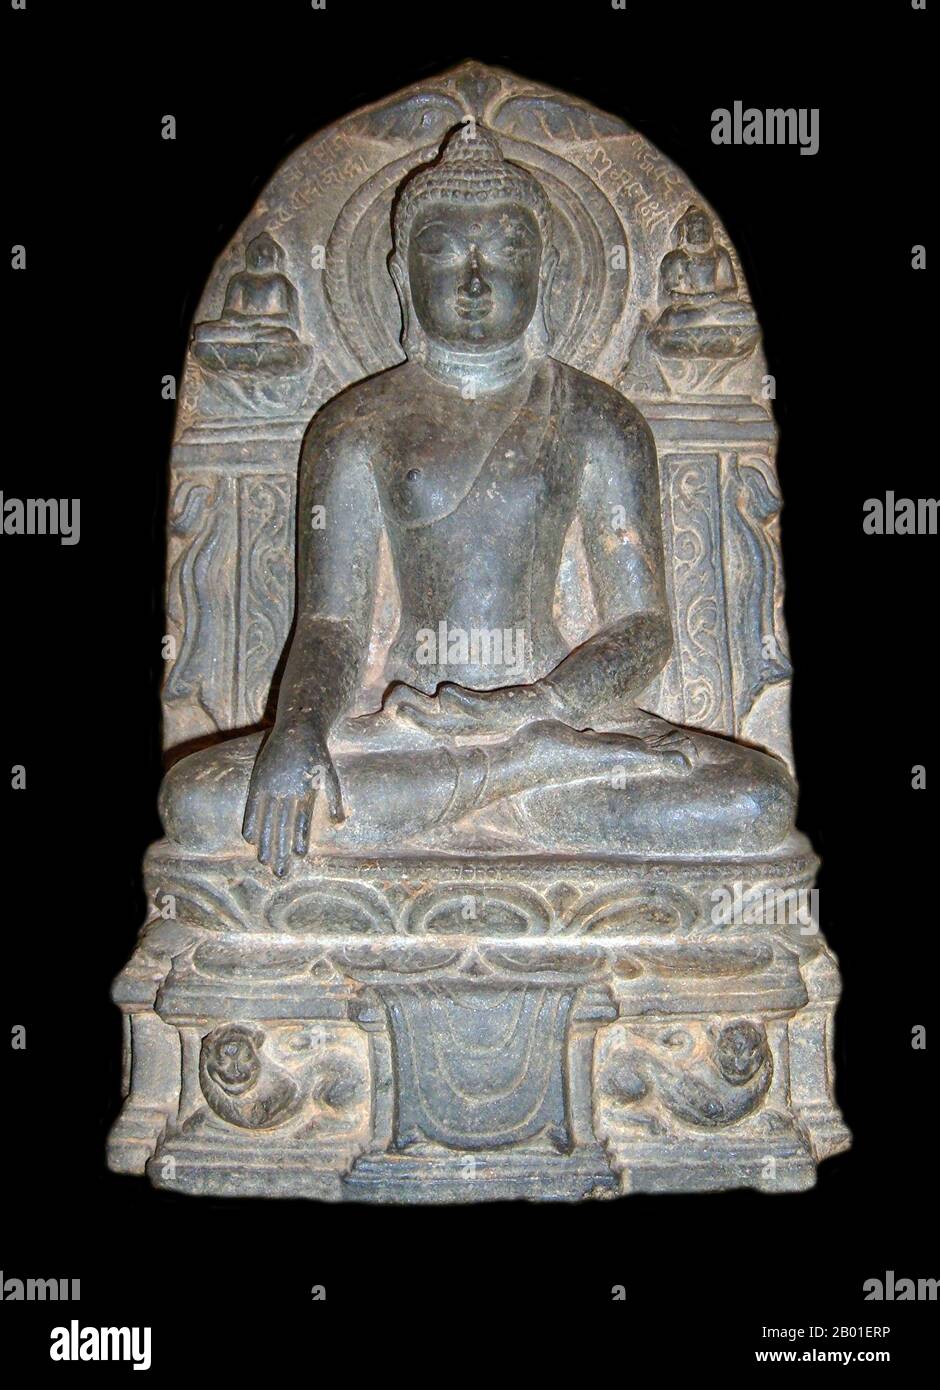 India/Bangladesh: A sculpture of Buddha in the Attitude of Victory over Mara, Bengal, Pala Dynasty, c. 11th century CE. Photo by BrokenSphere (CC BY-SA 3.0 License).  The Pāla Empire, one of the major middle kingdoms of India, existed from 750–1174 CE. It was ruled by a Buddhist dynasty from Bengal in the eastern region of the Indian subcontinent, all the rulers bearing names ending with the suffix Pala (Modern Bengali: পাল pāl), which means protector. The Palas were often described by opponents as the Lords of Gauda. The Palas were followers of the Mahayana and Tantric schools of Buddhism. Stock Photo